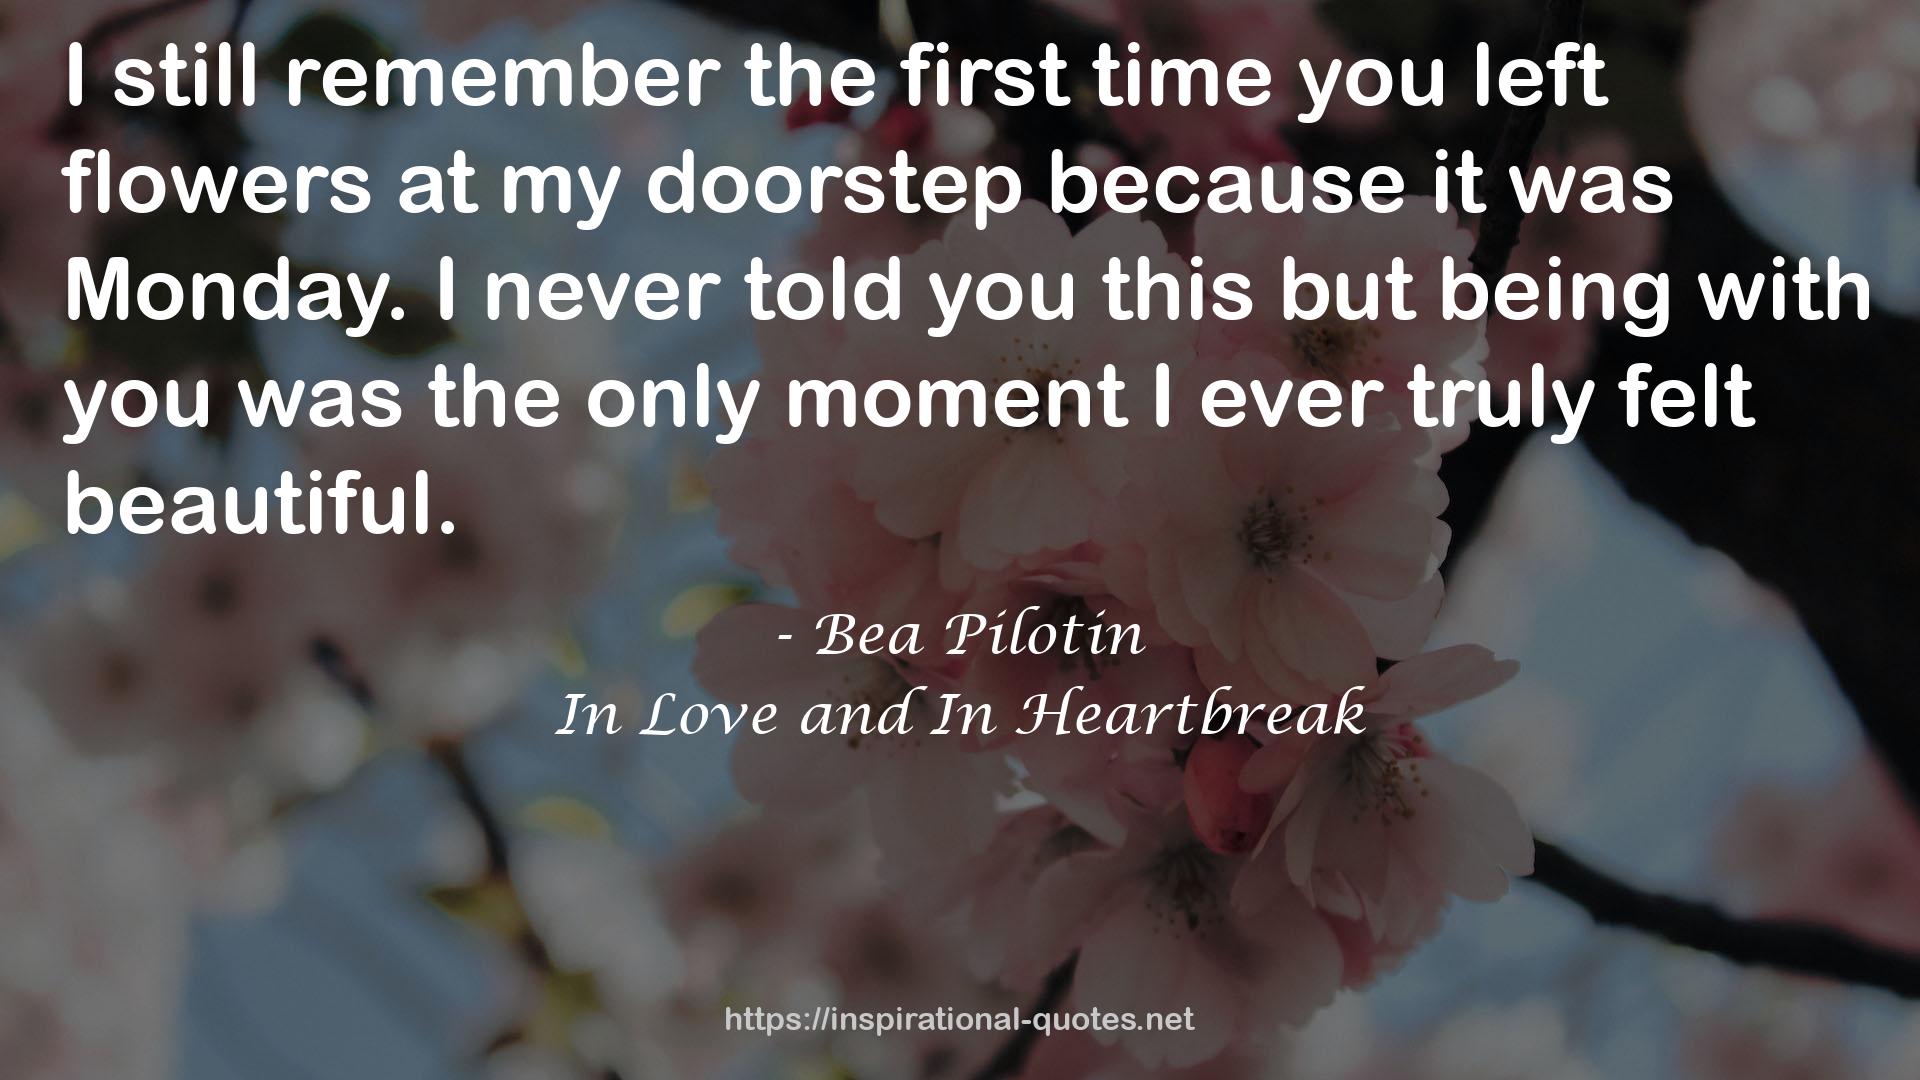 In Love and In Heartbreak QUOTES